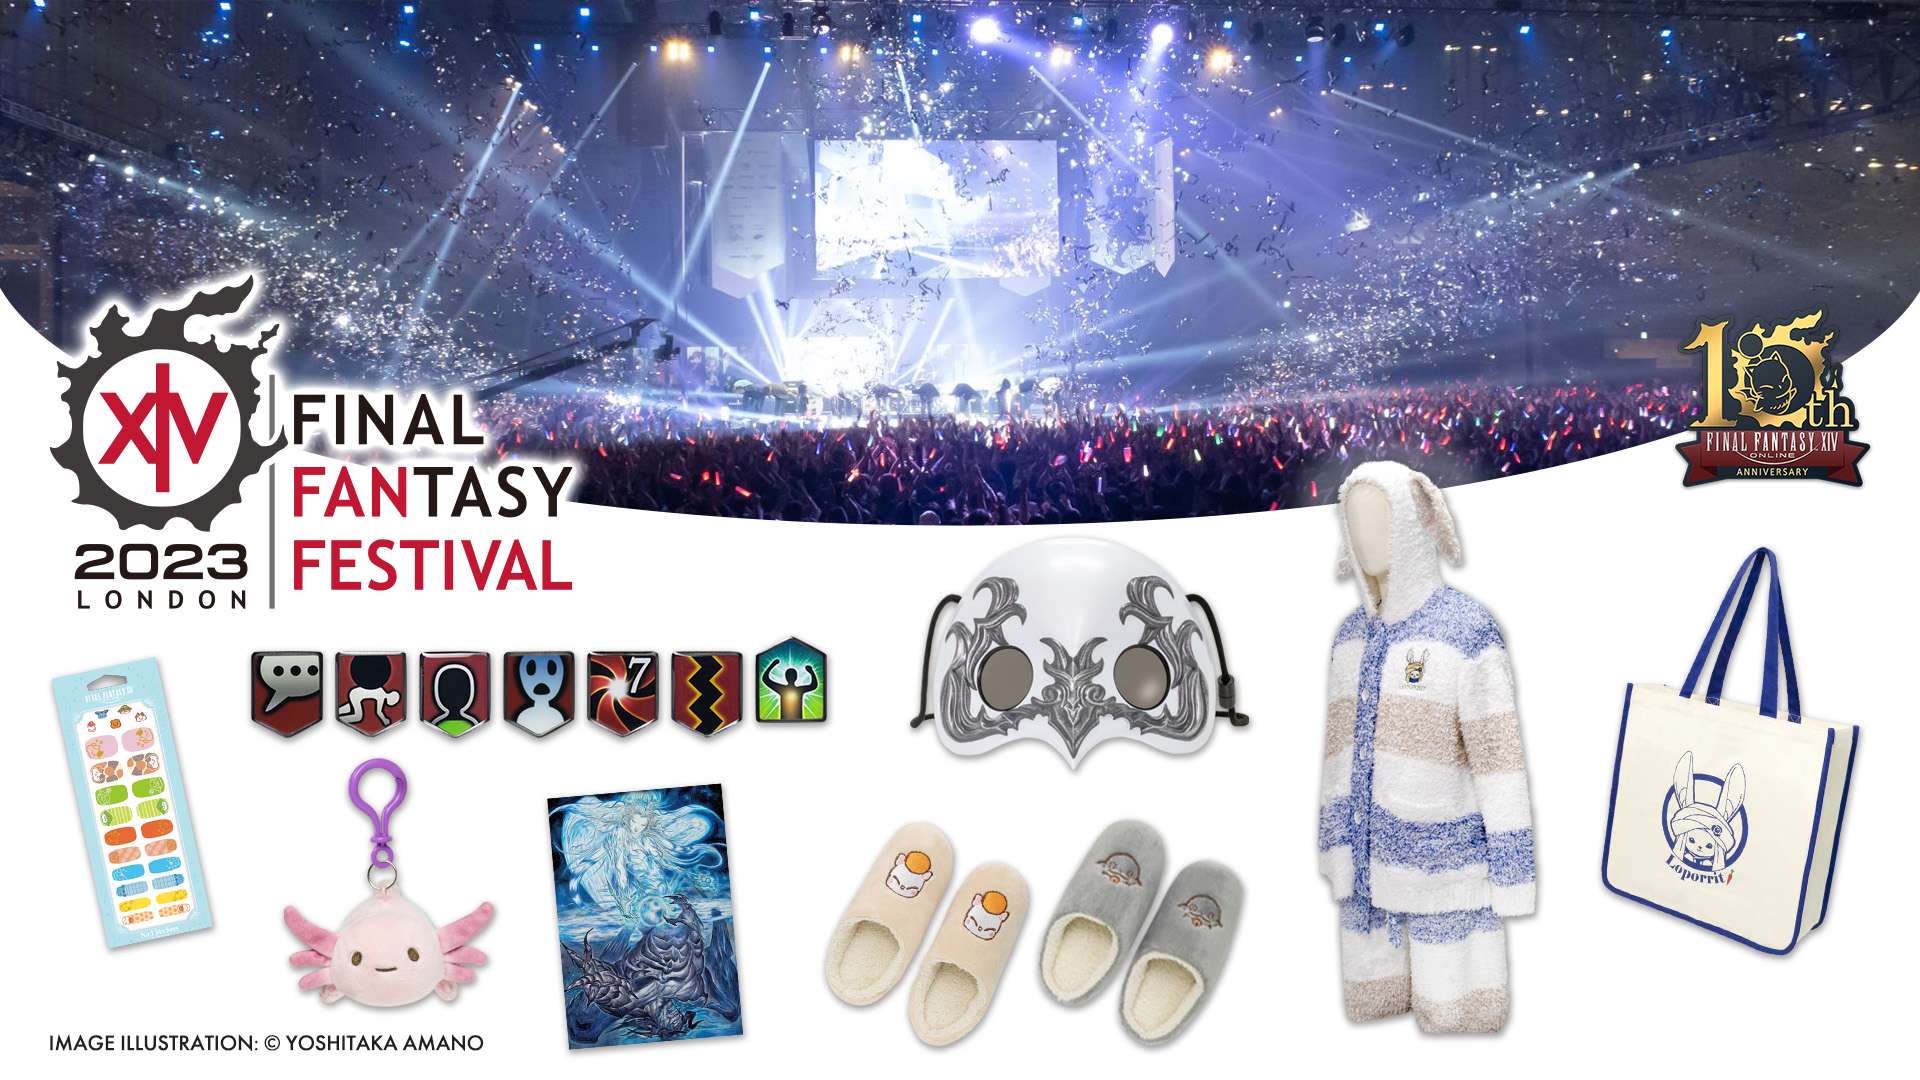 A banner for commemorative merchandise to celebrate the Final Fantasy 14 Fan Festival 2023-2024. Banner shows multiple products, including stickers, pins, slippers, tote bag, and other goodies.